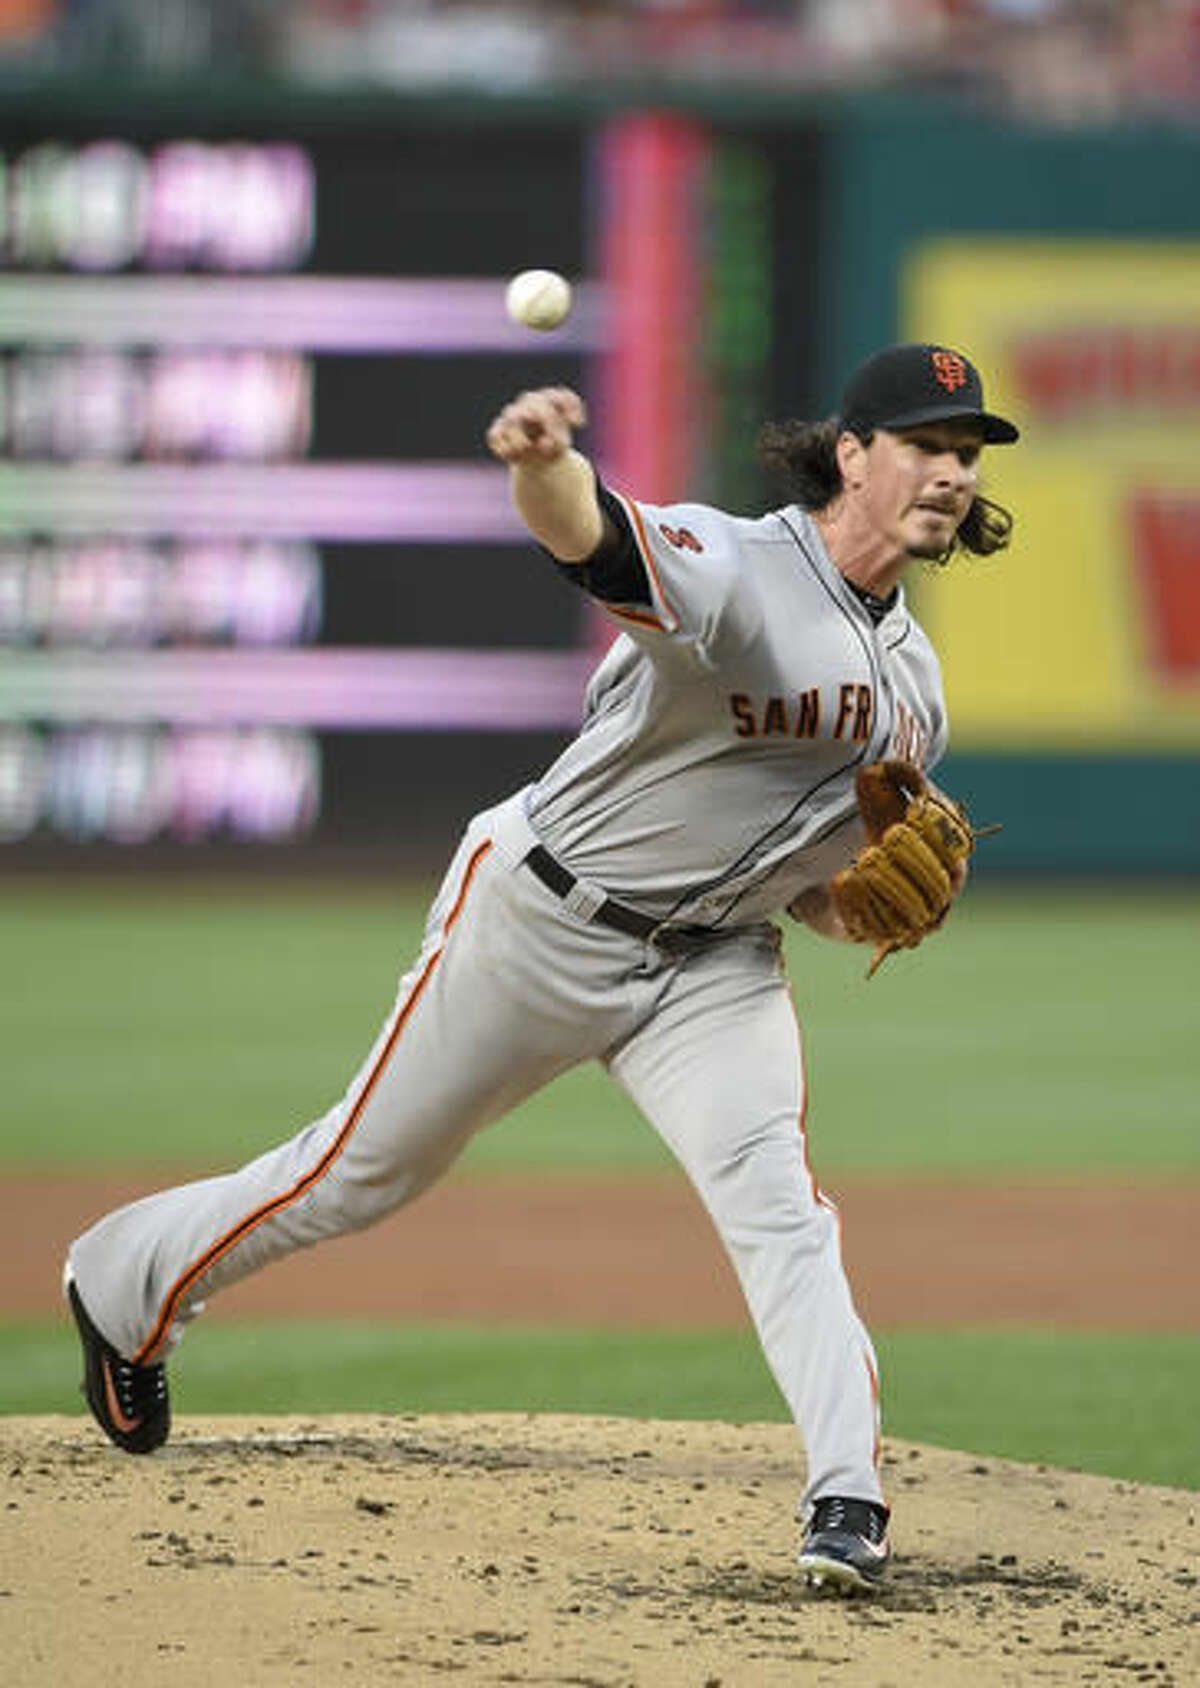 San Francisco Giants starting pitcher Jeff Samardzija delivers a pitch during the second inning of a baseball game against the Washington Nationals, Friday, Aug. 5, 2016, in Washington. (AP Photo/Nick Wass)